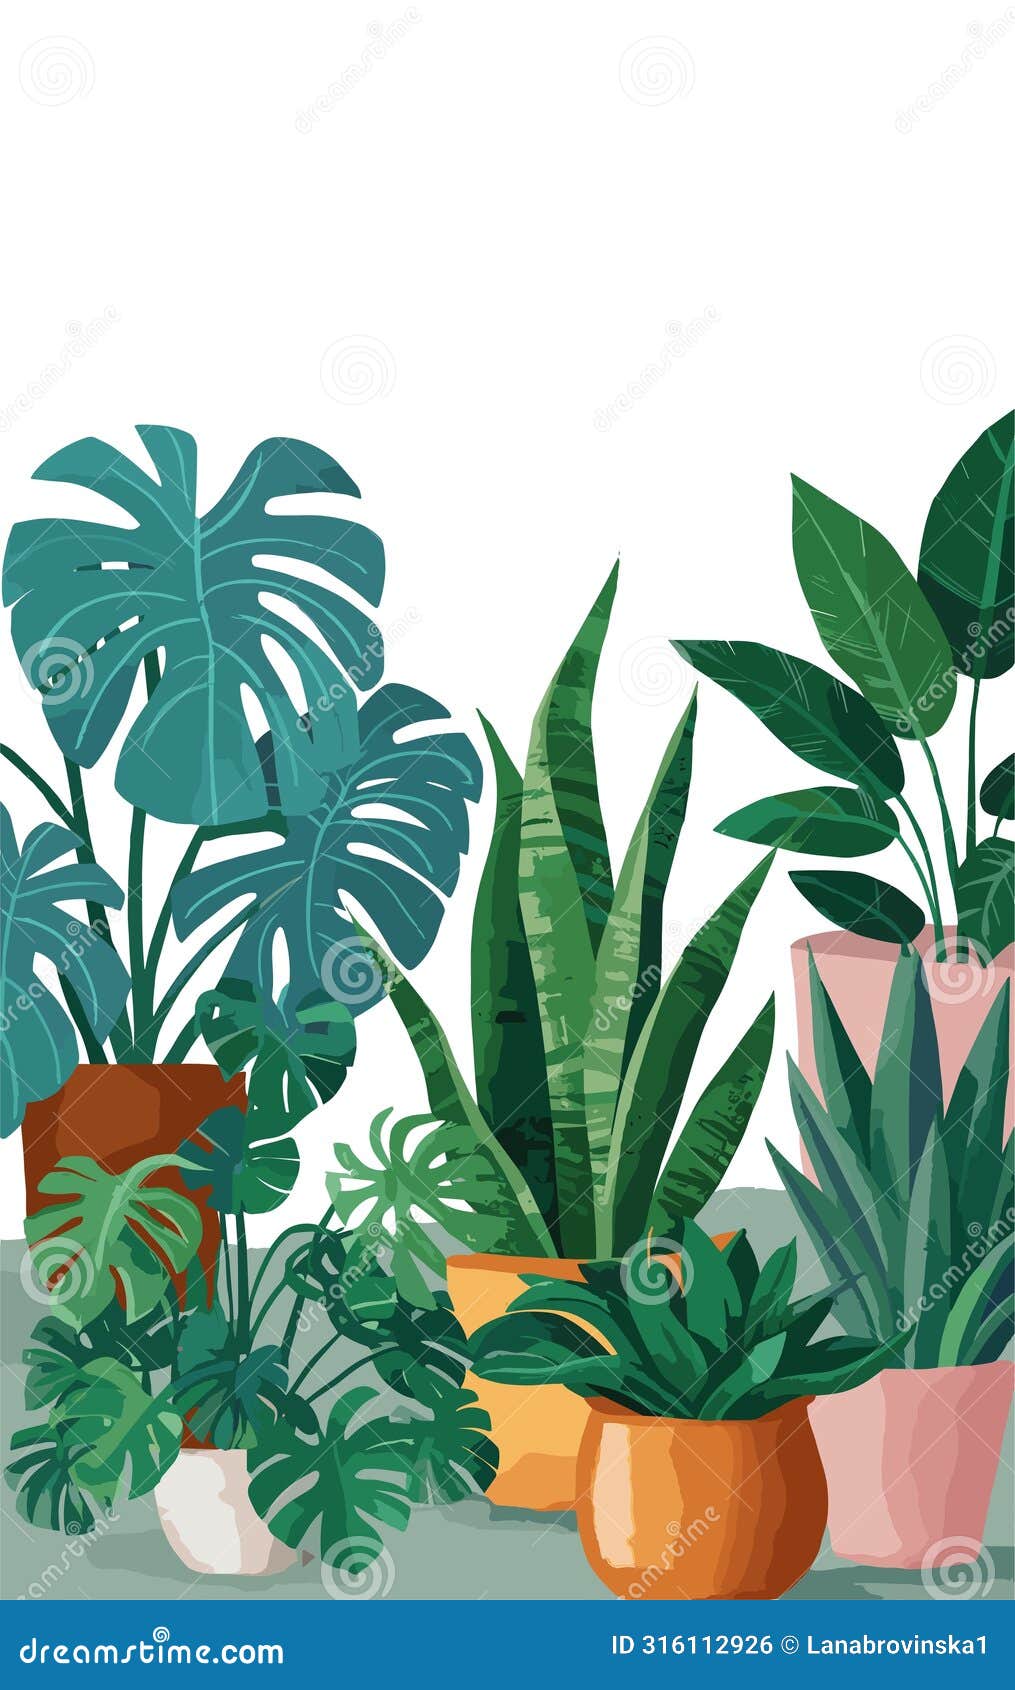 a  drawing of several potted plants.